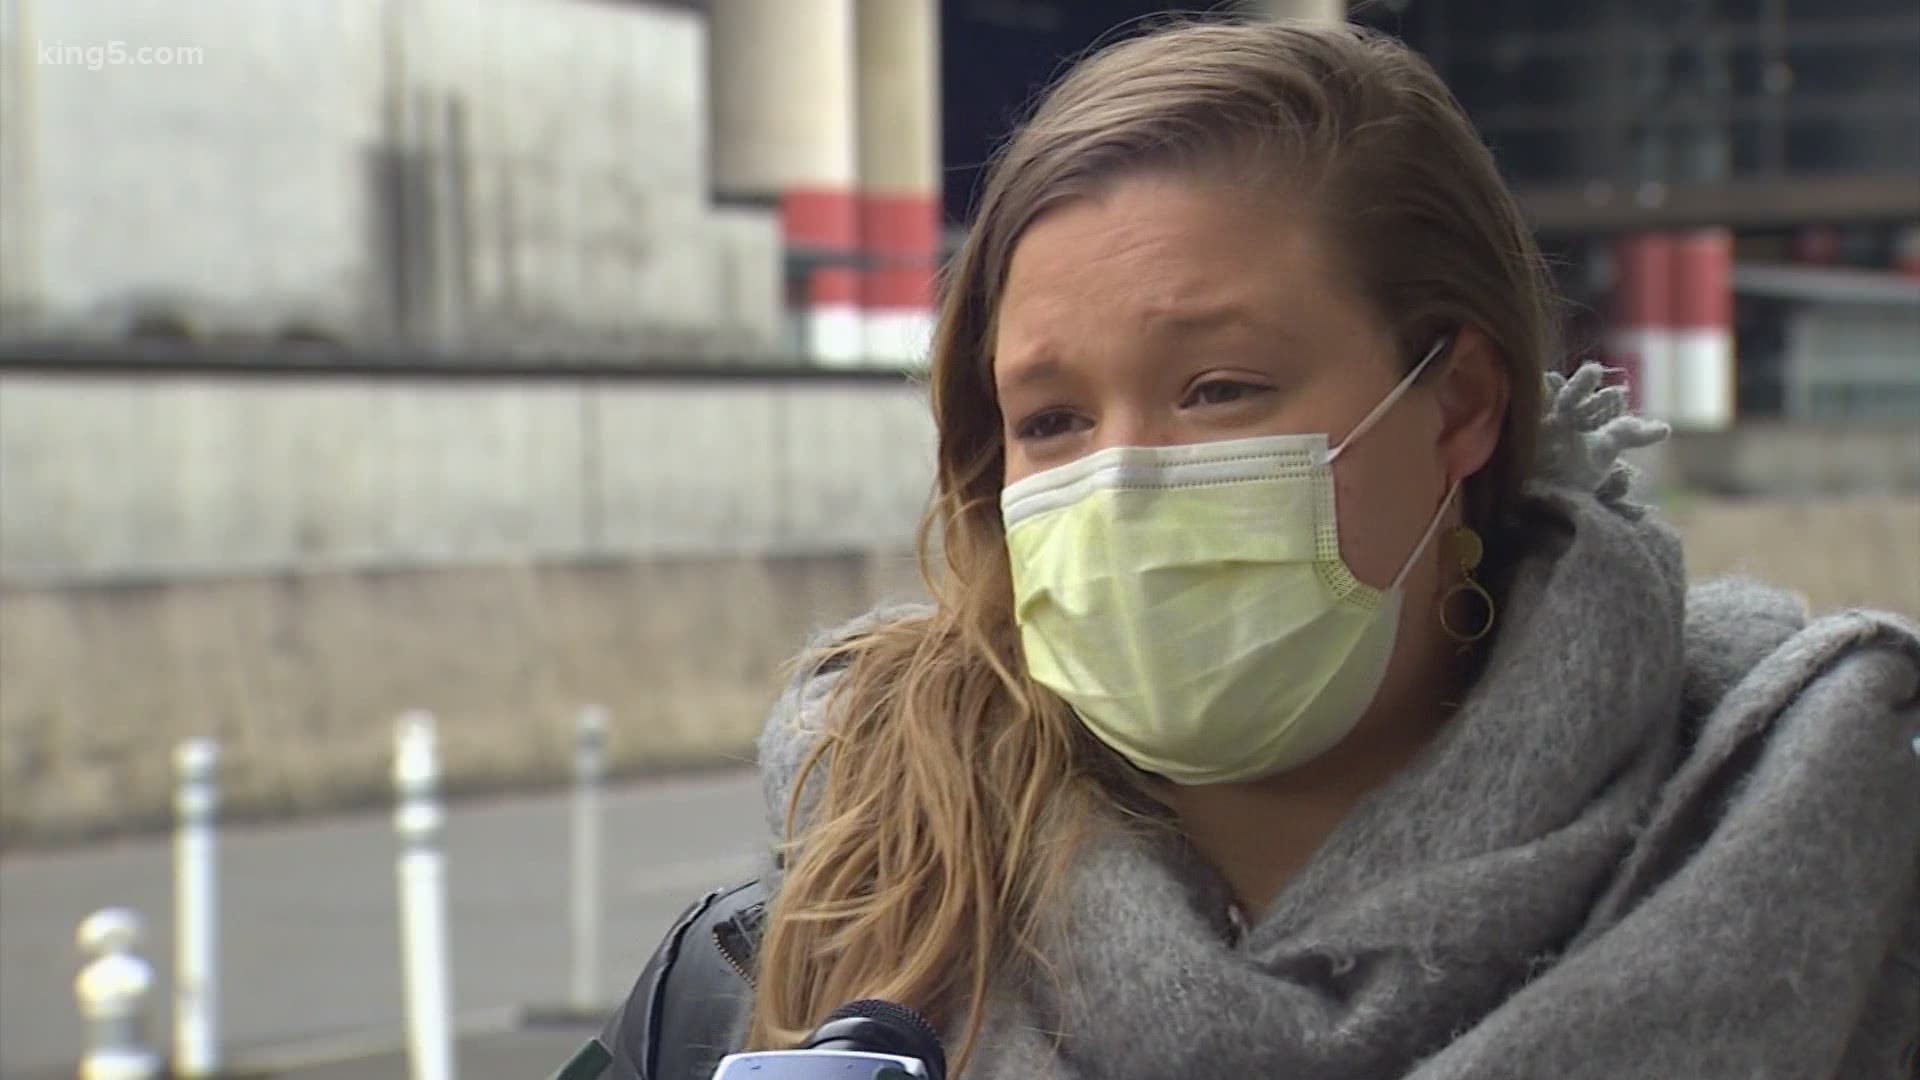 A Seattle nurse is traveling to New York to help treat patients in a coronavirus ICU unit.